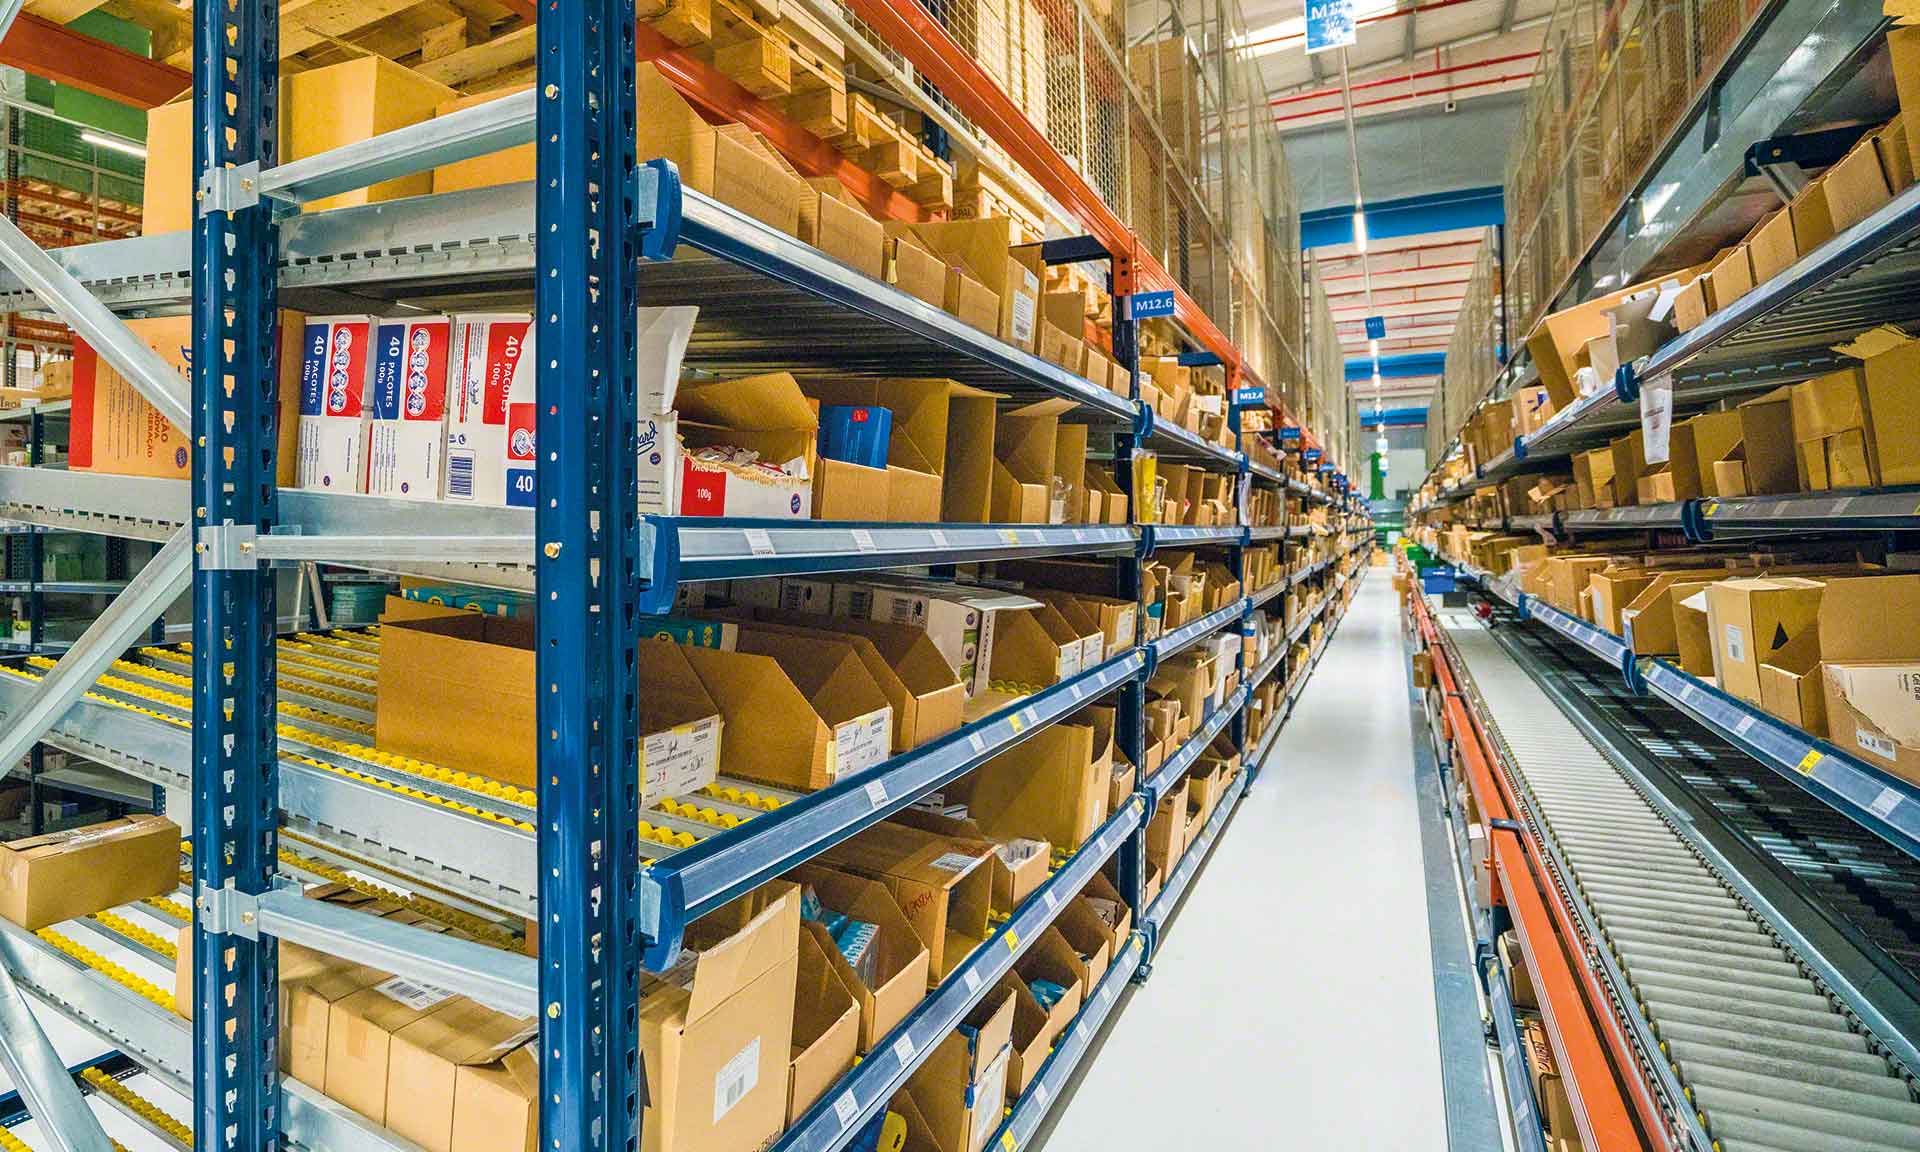 Optimal stock levels are the minimum quantity of goods a company needs in the warehouse to dispatch orders regularly